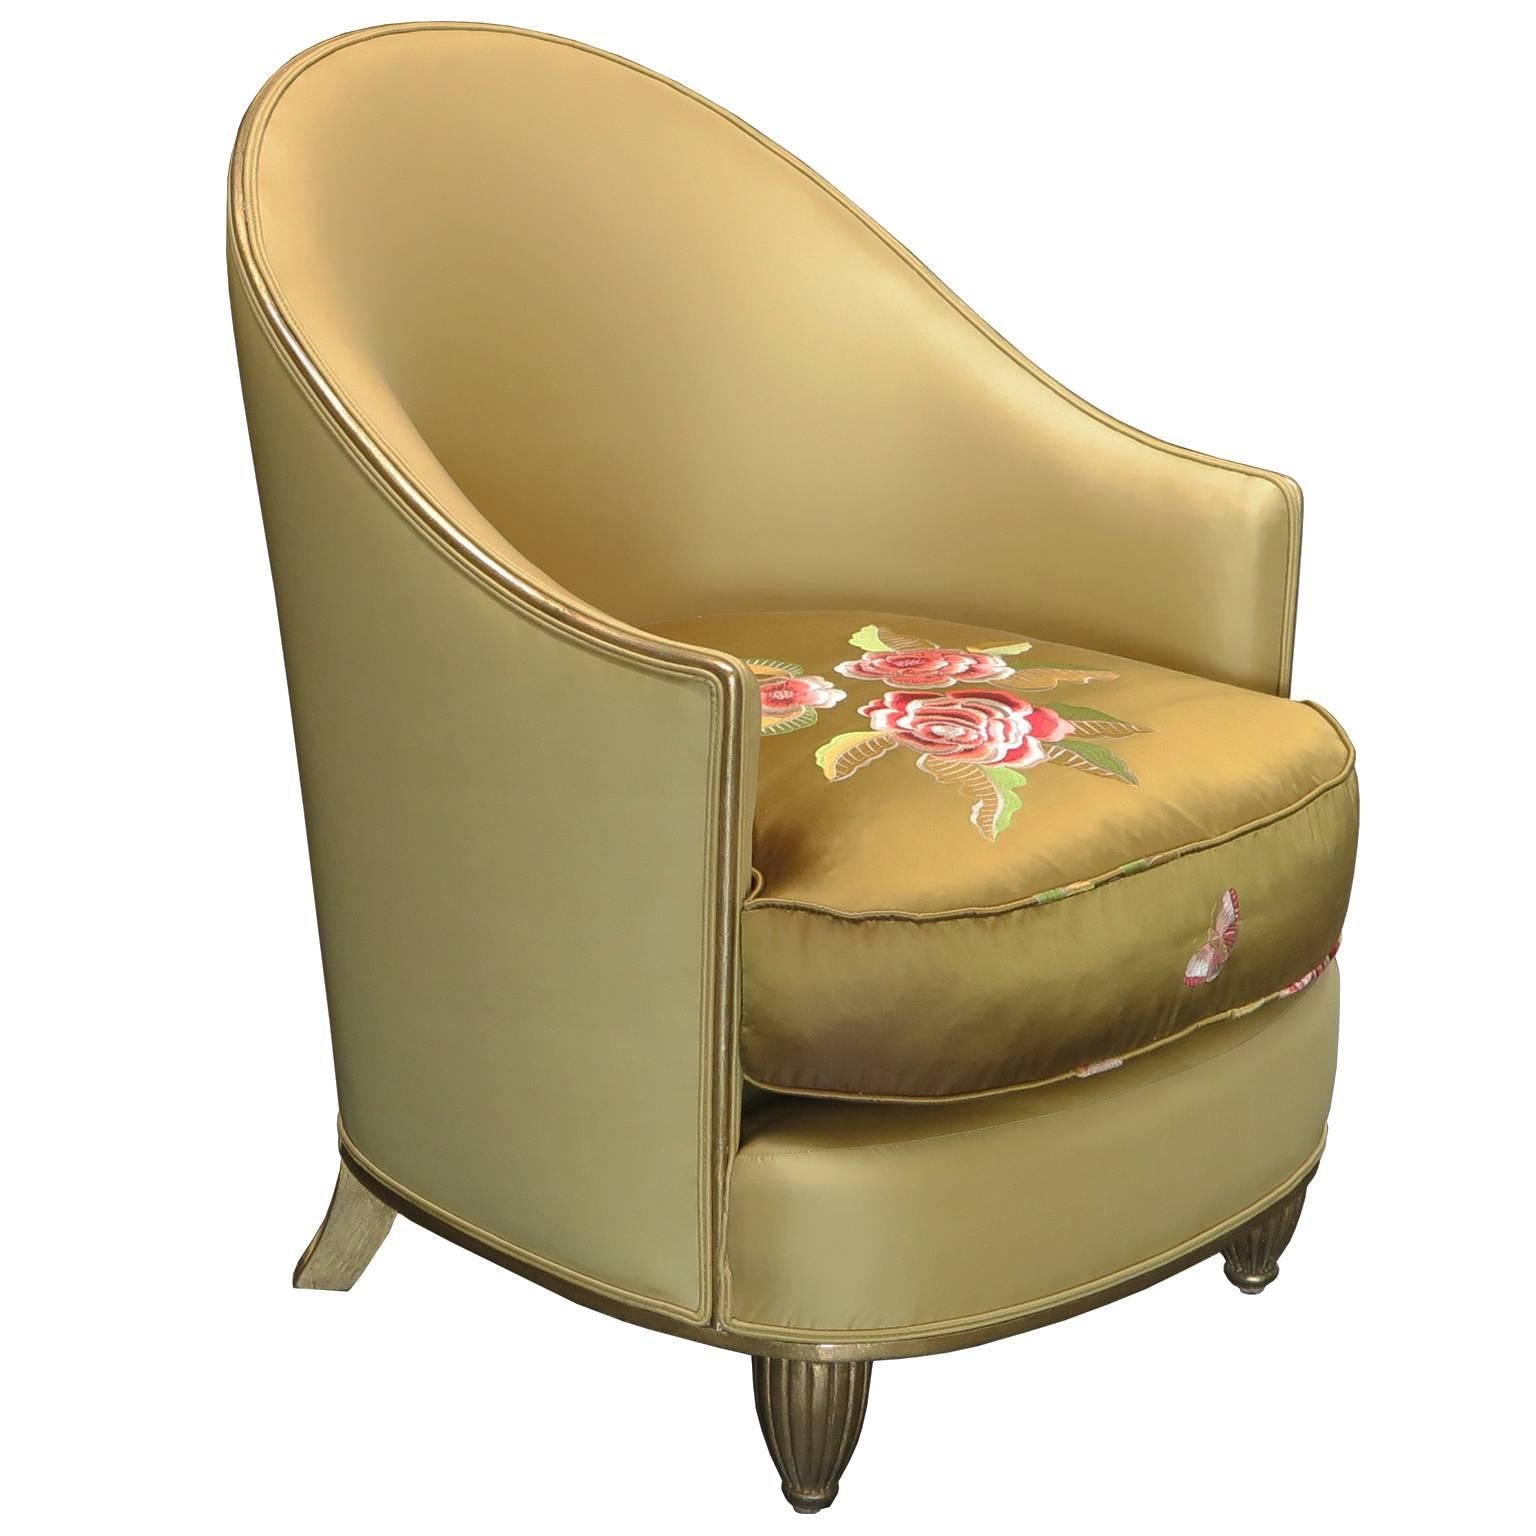 Beautiful pair of Art Deco lounge chairs with a curved frame in antiqued gold leaf. Chairs are upholstered in olive silk, the dark olive seat cushions have hand embroidered floral details. Gold leafed front legs have a ribbed design.